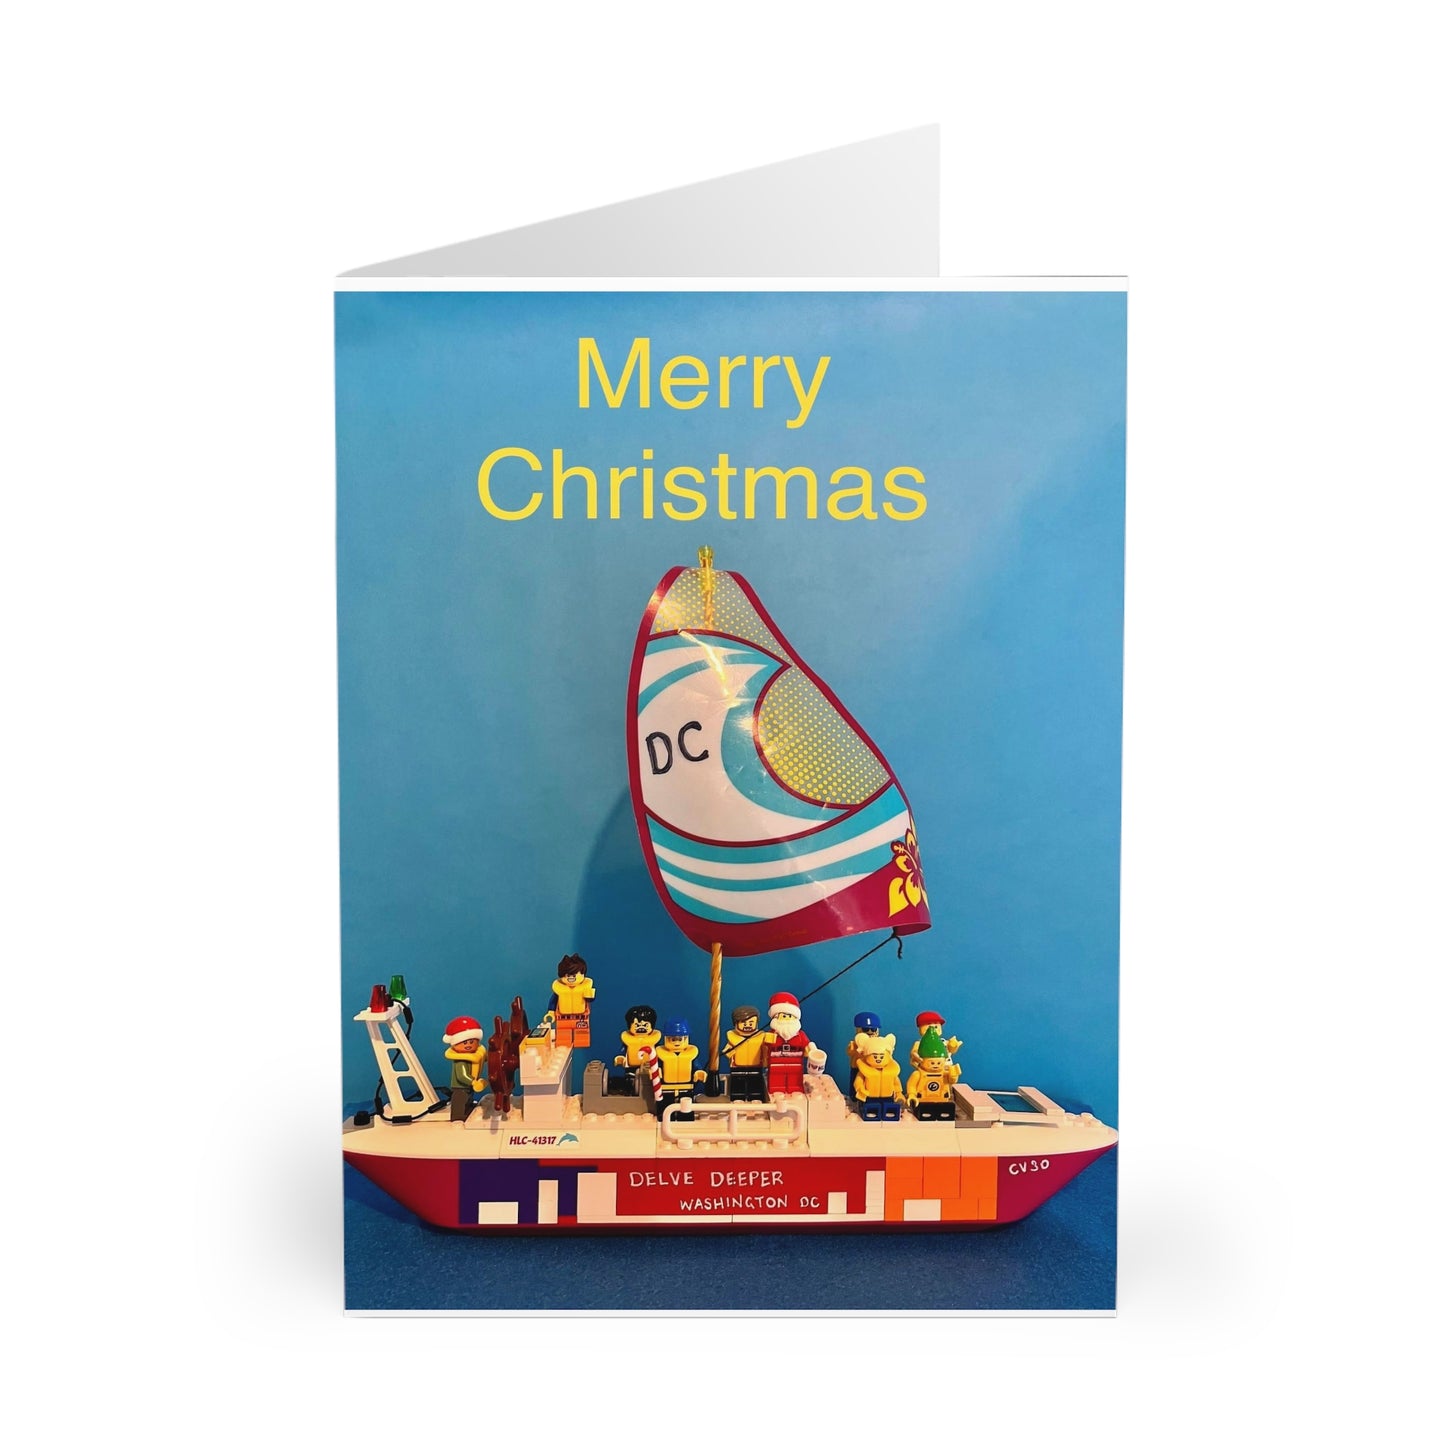 Charity Christmas Cards (5 Pack)